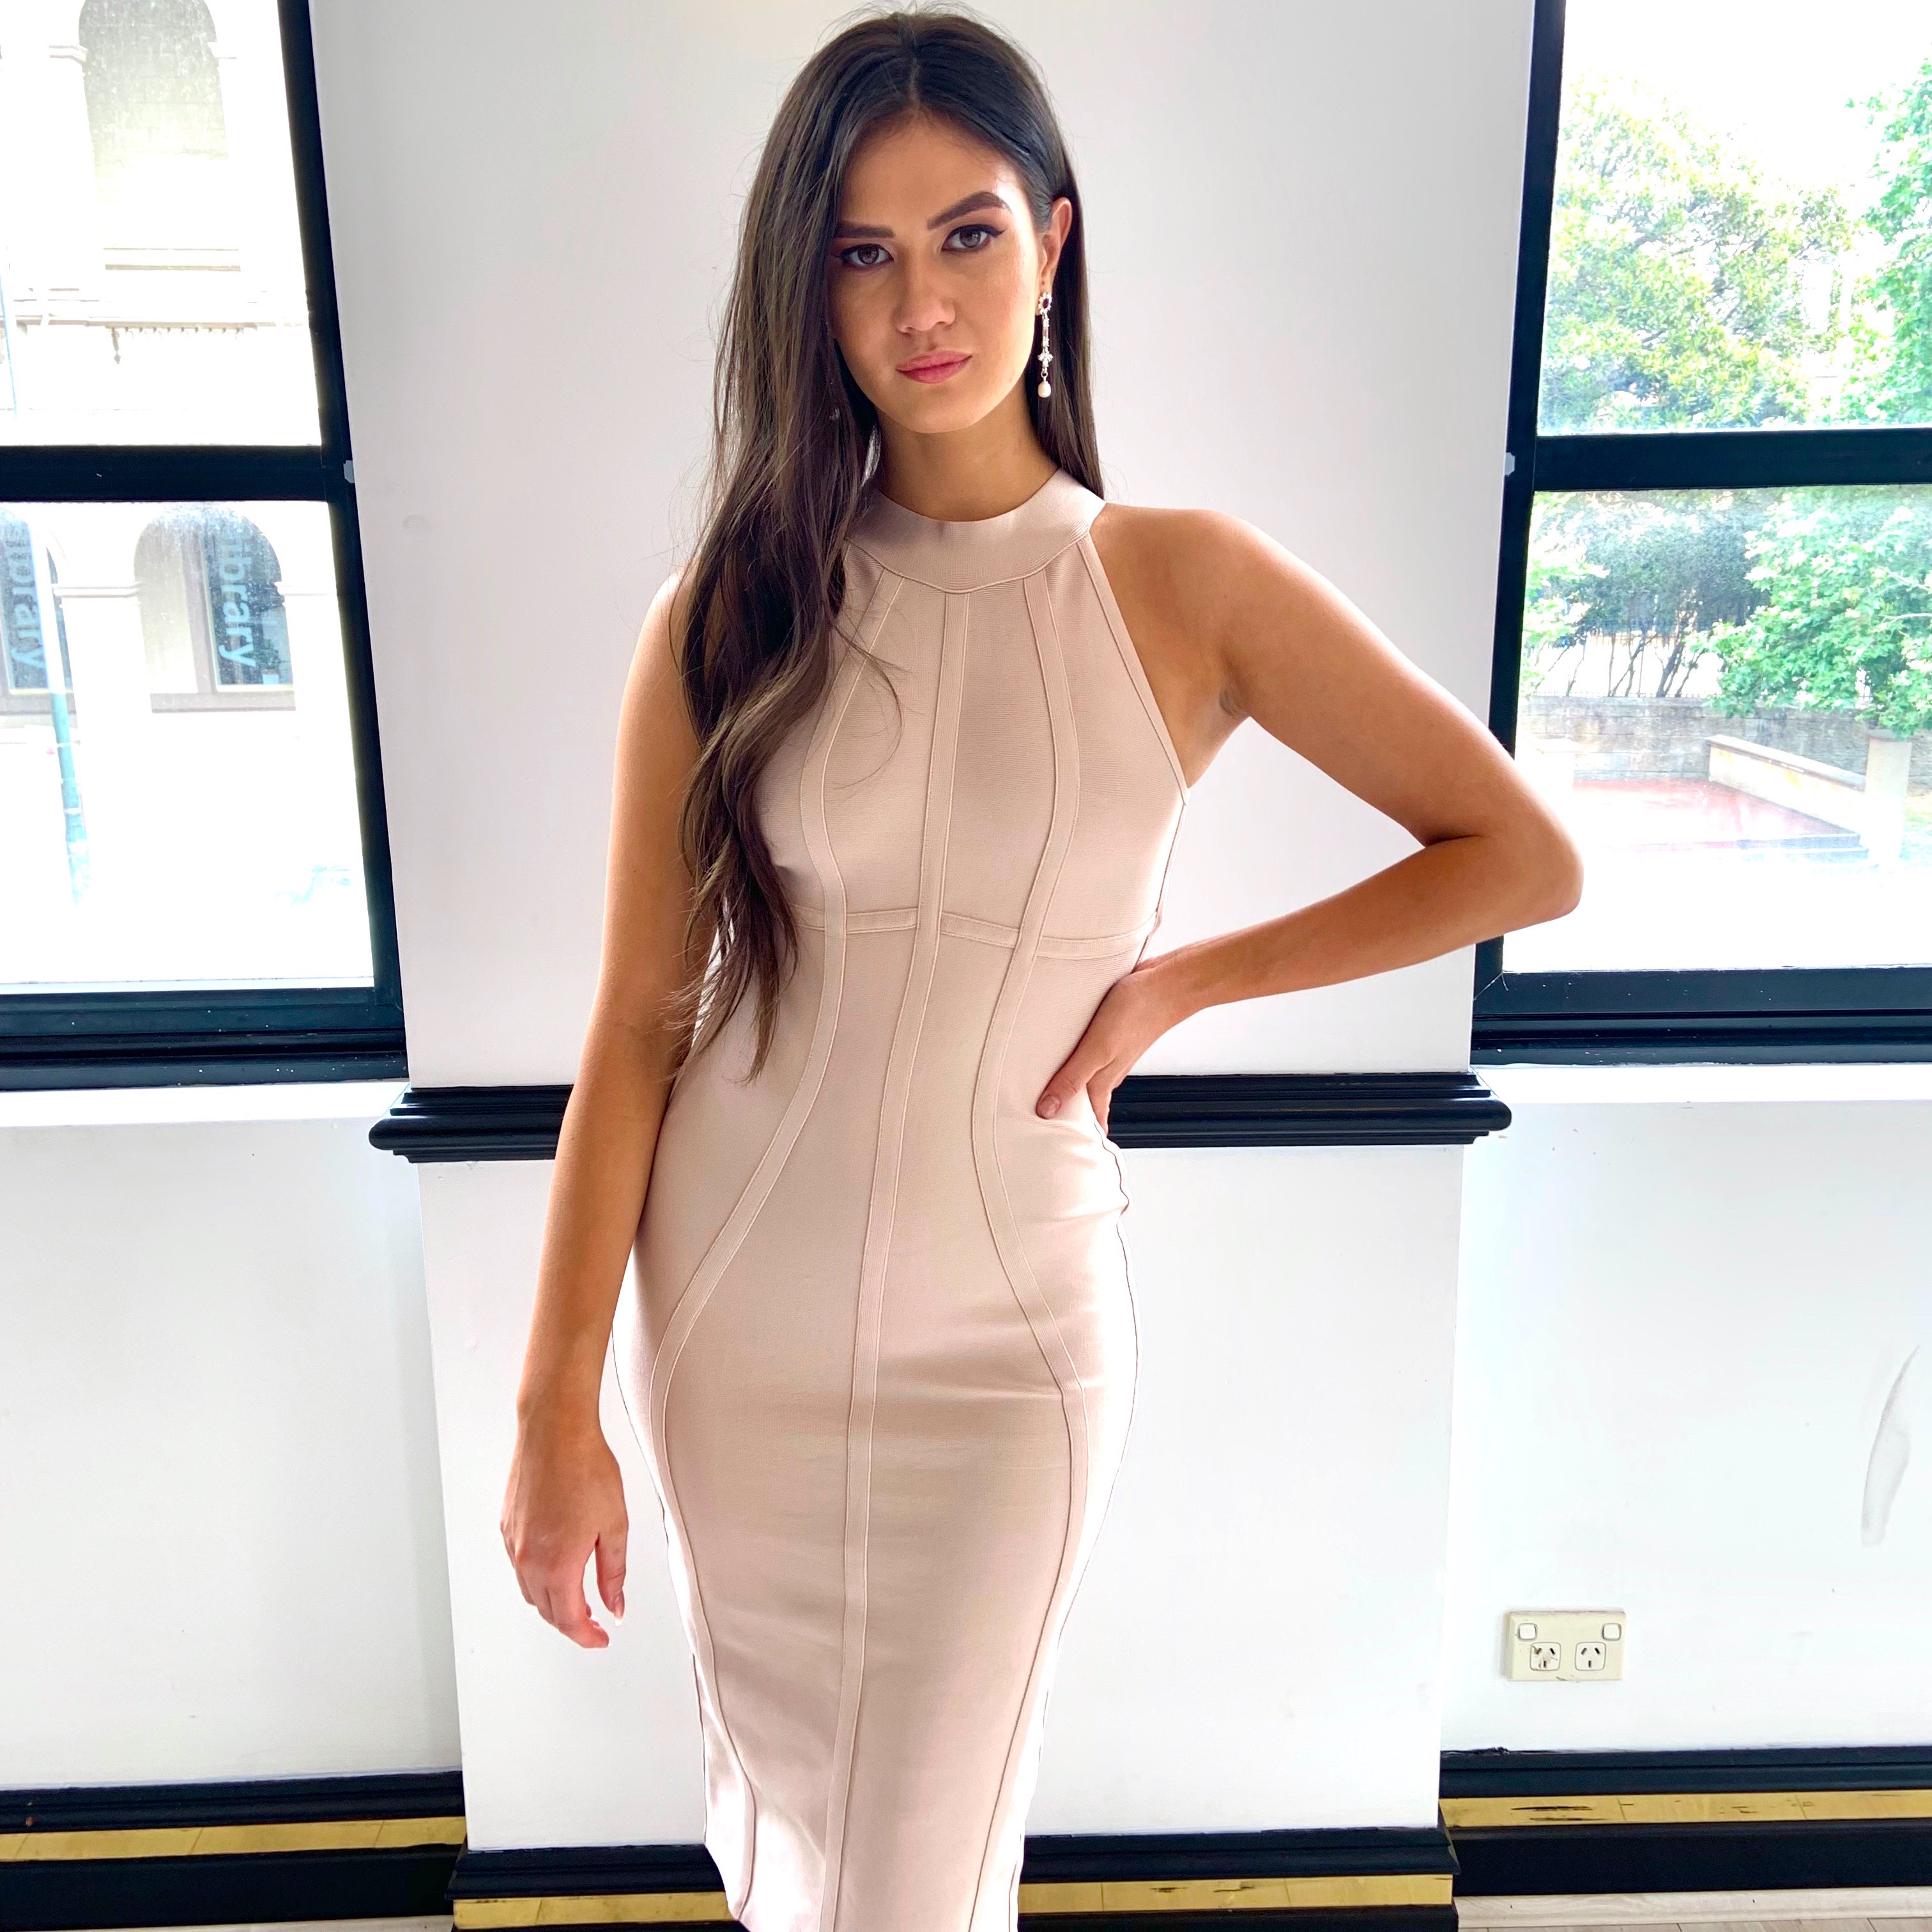 haat mager liefdadigheid Are Bandage Dresses Still In Style In 2020? - House of Troy